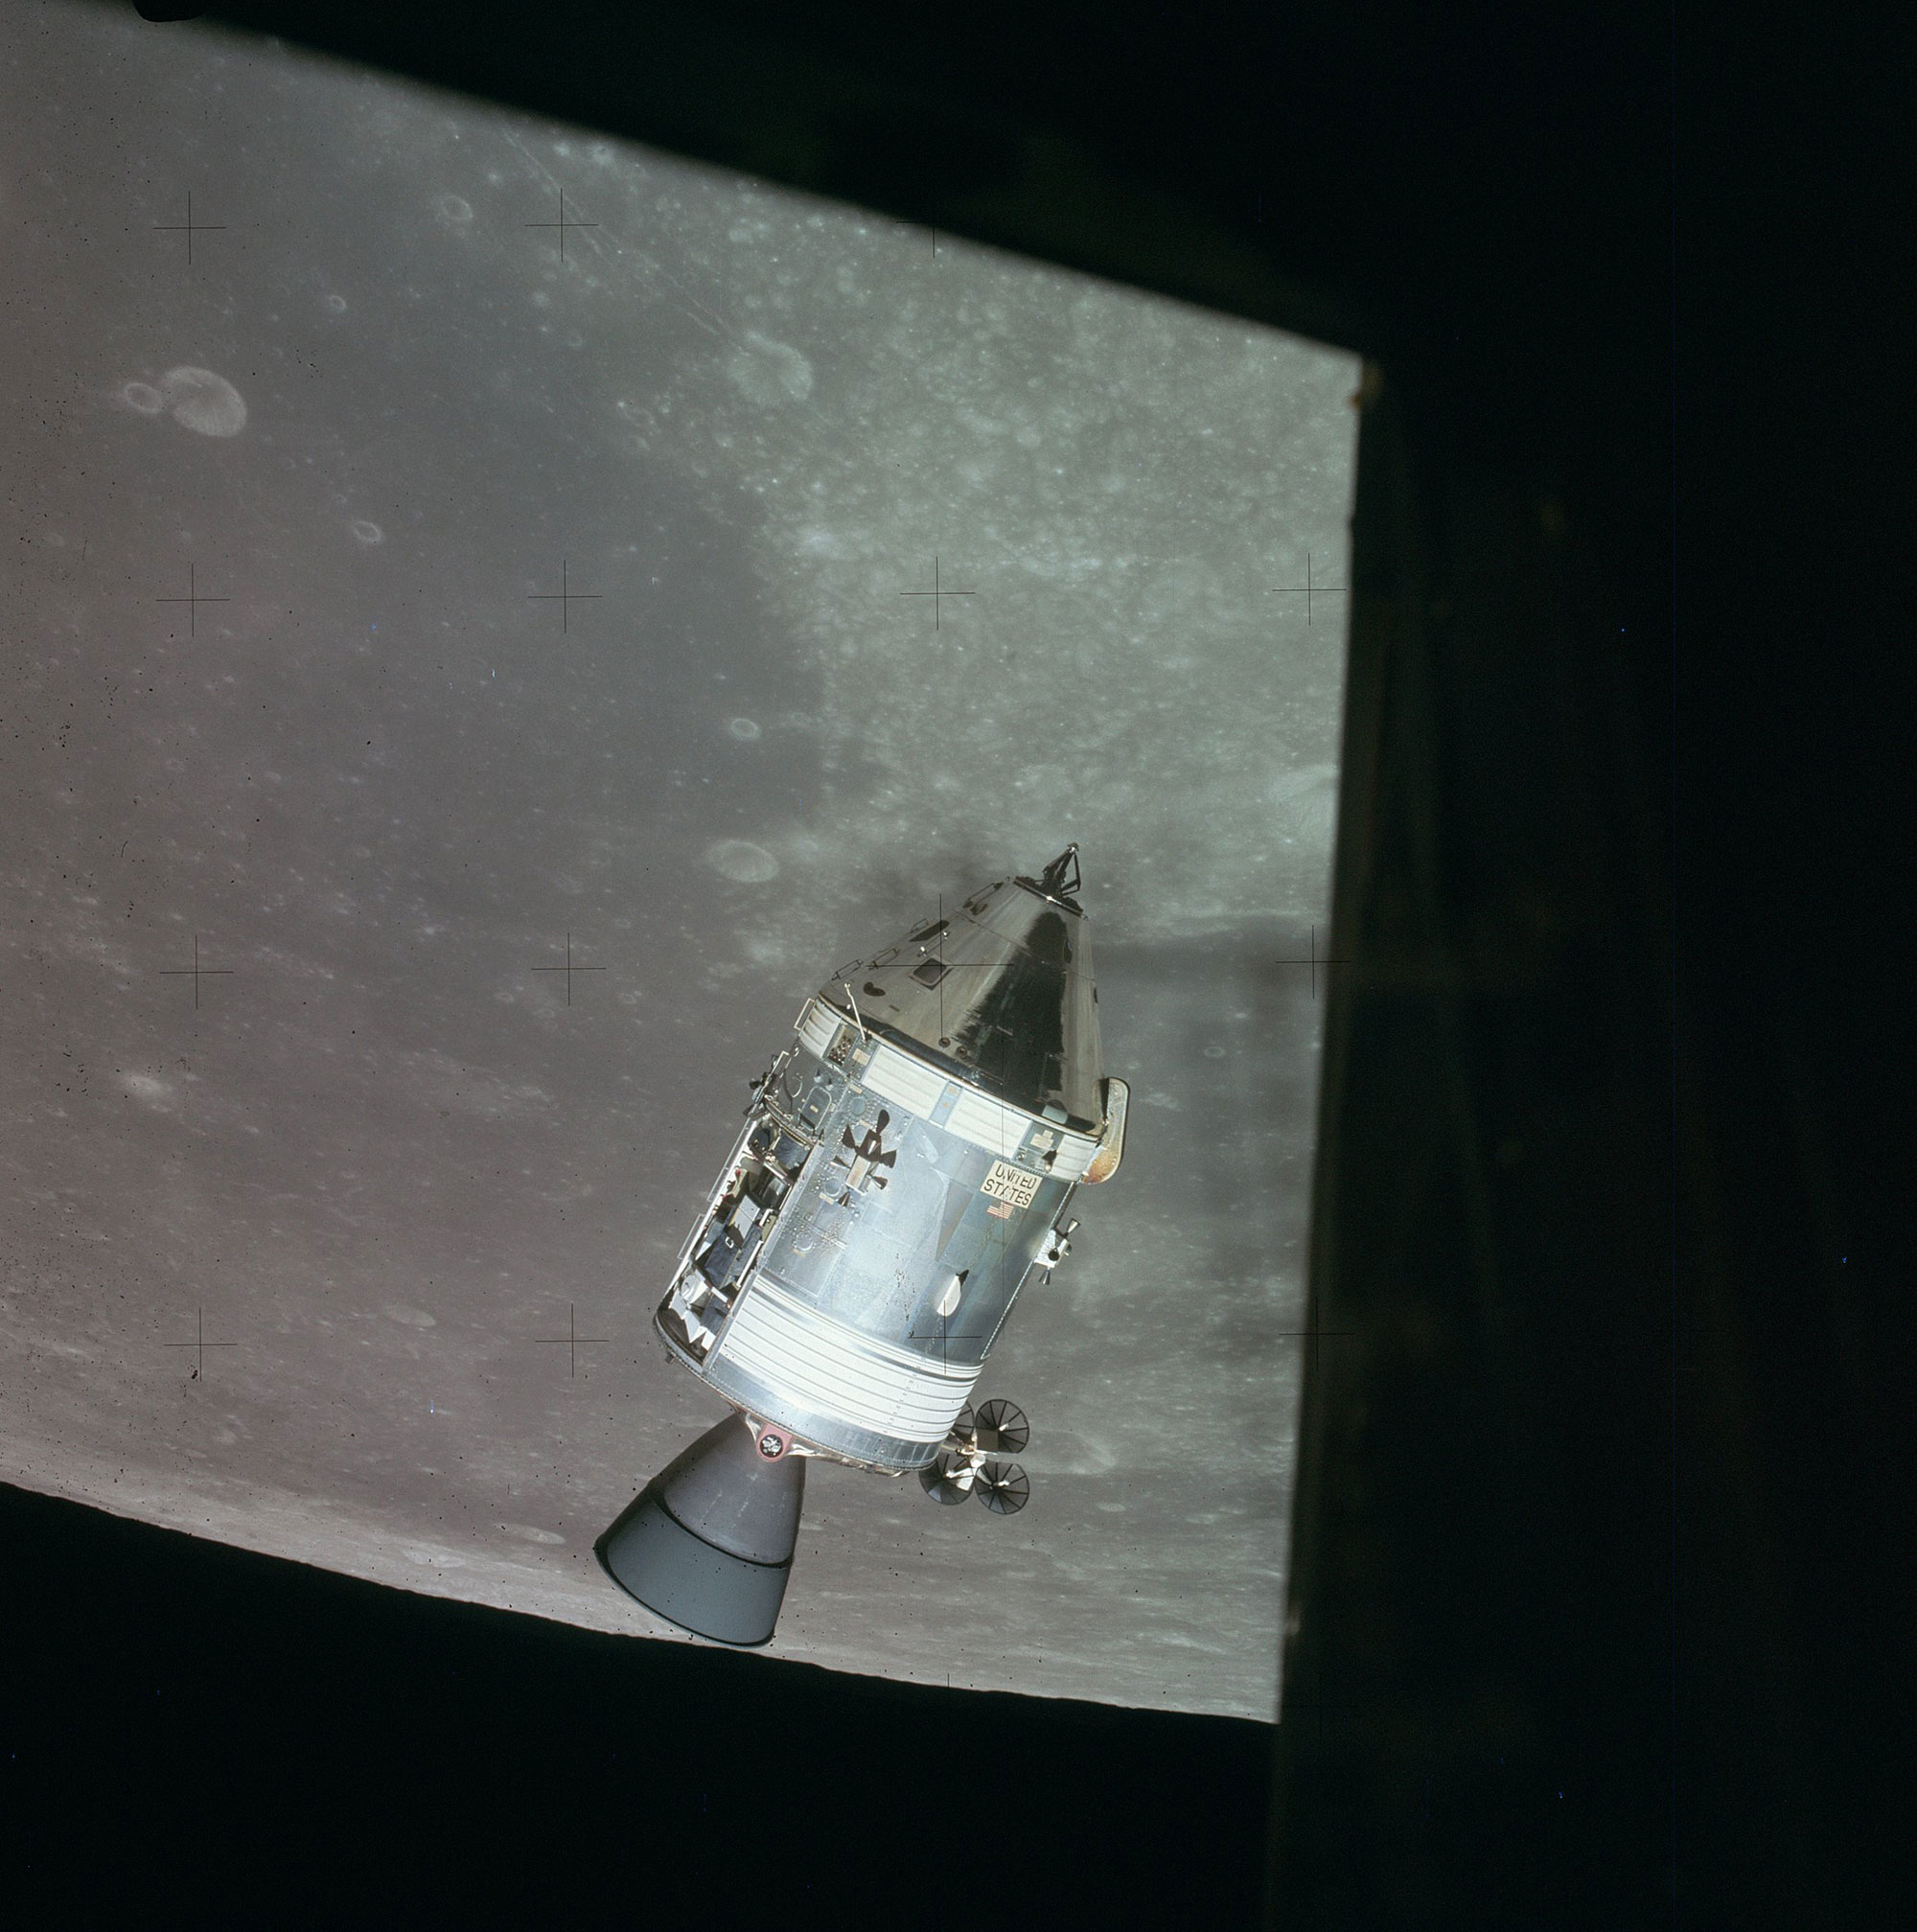 The Apollo 15 spacecraft was modified to carry out a greater range of lunar orbital science activities than any previous mission. Credit: NASA